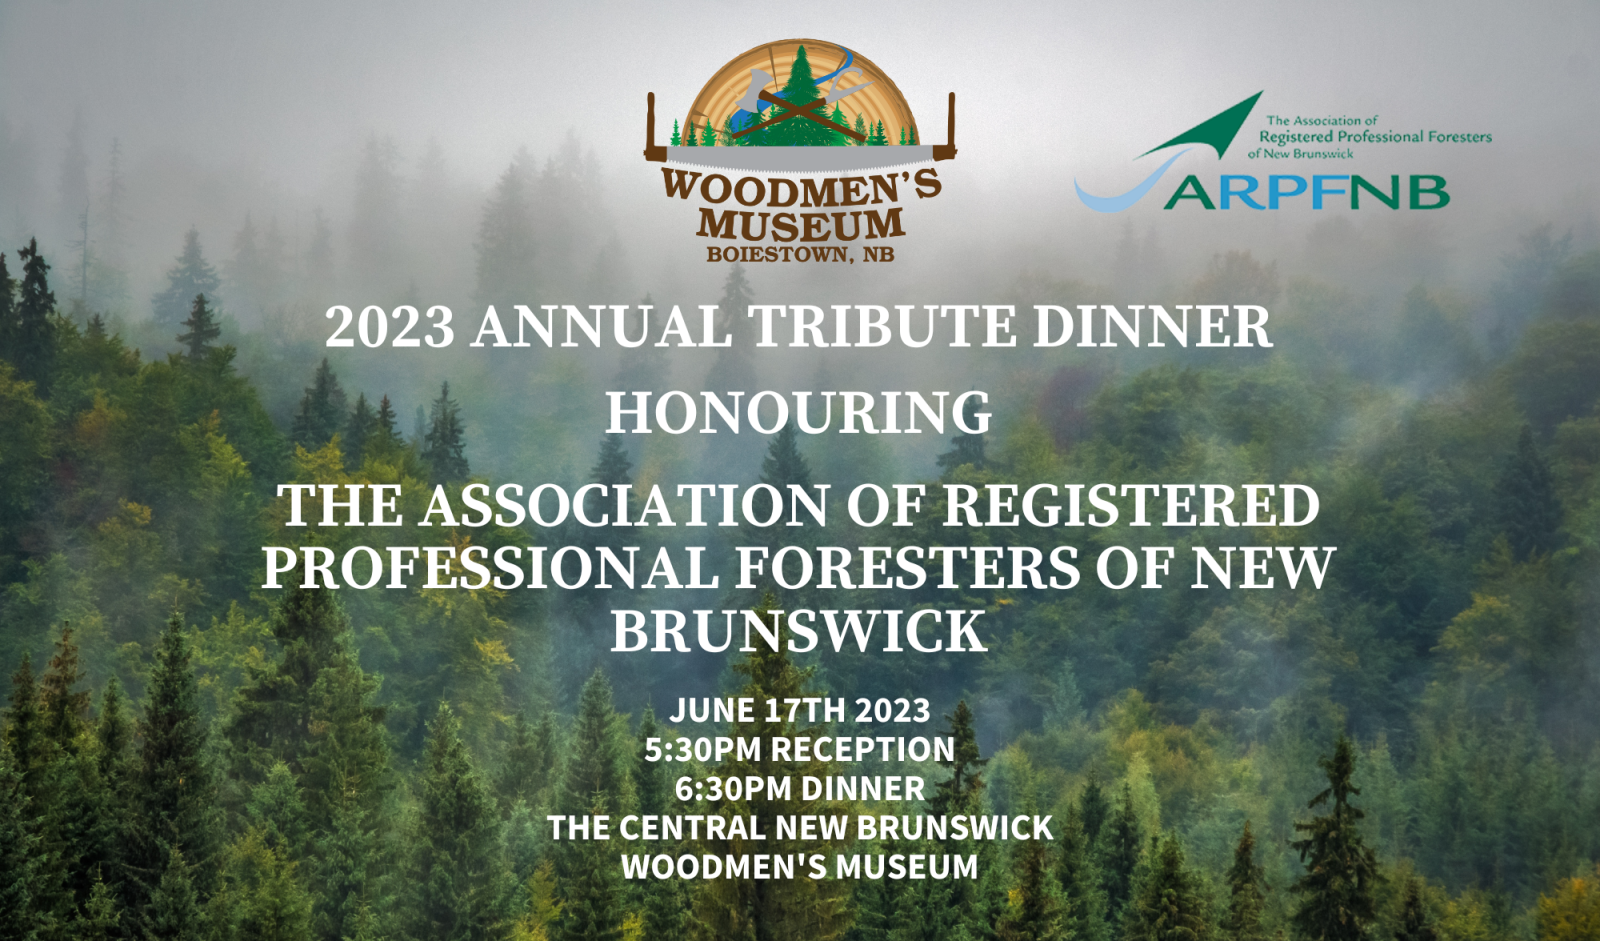 http://woodmensmuseum.com/wp-content/uploads/2023/05/2023-Tribute-Dinner-Tickets-8.5-×-11-in-8.5-×-8.5-in-8.5-×-5-in.png